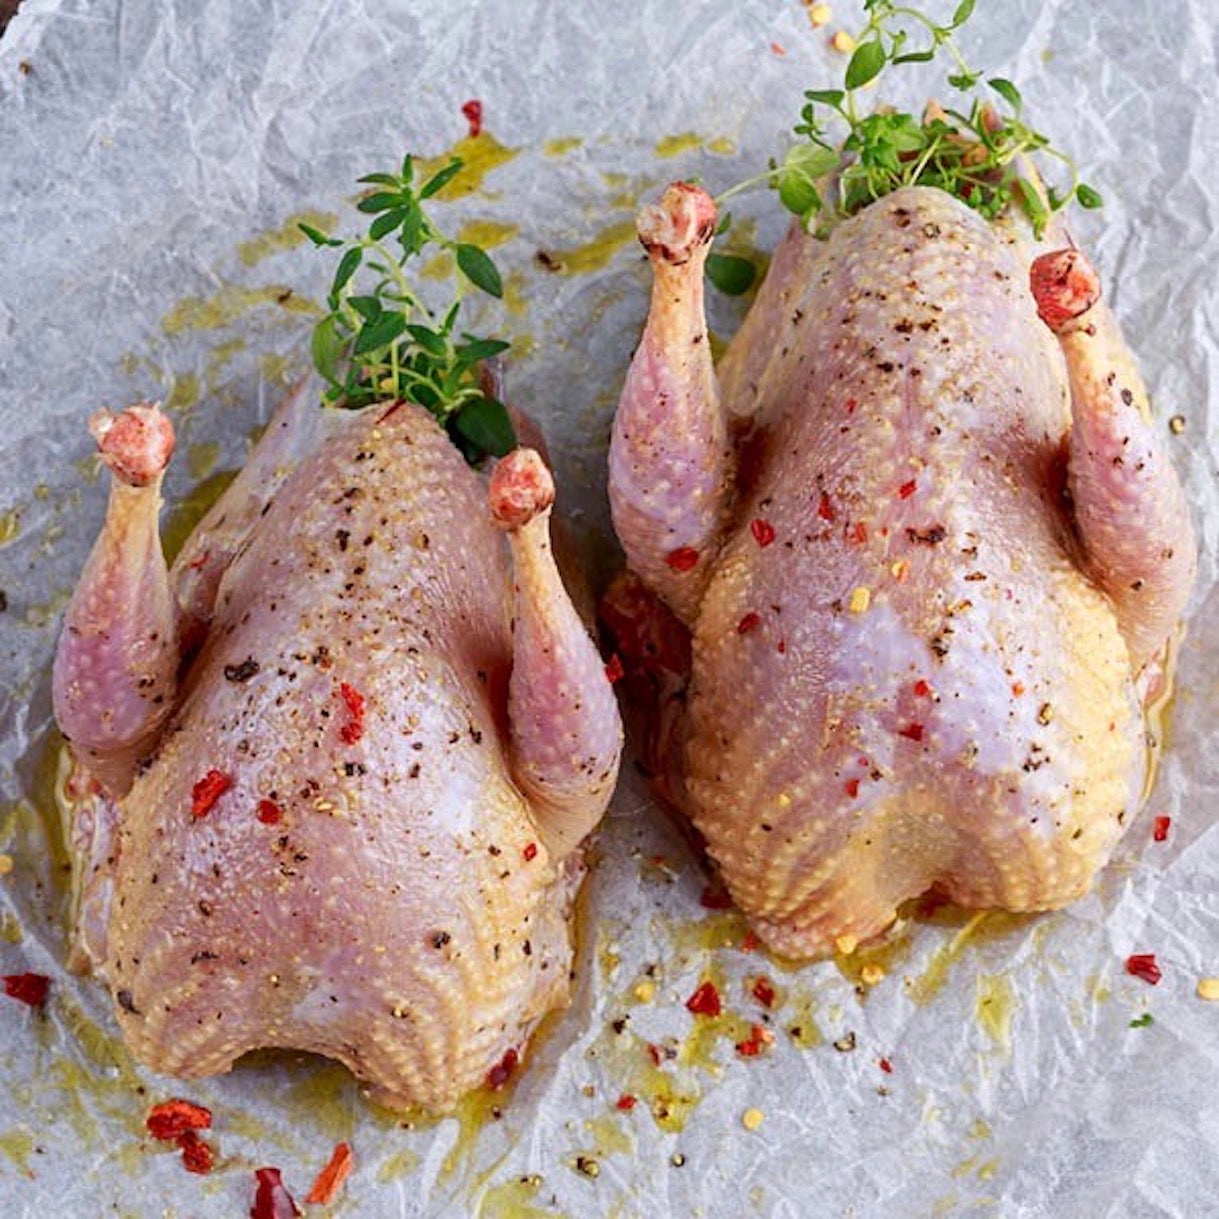 Shop Quails in Singapore - The New Grocer